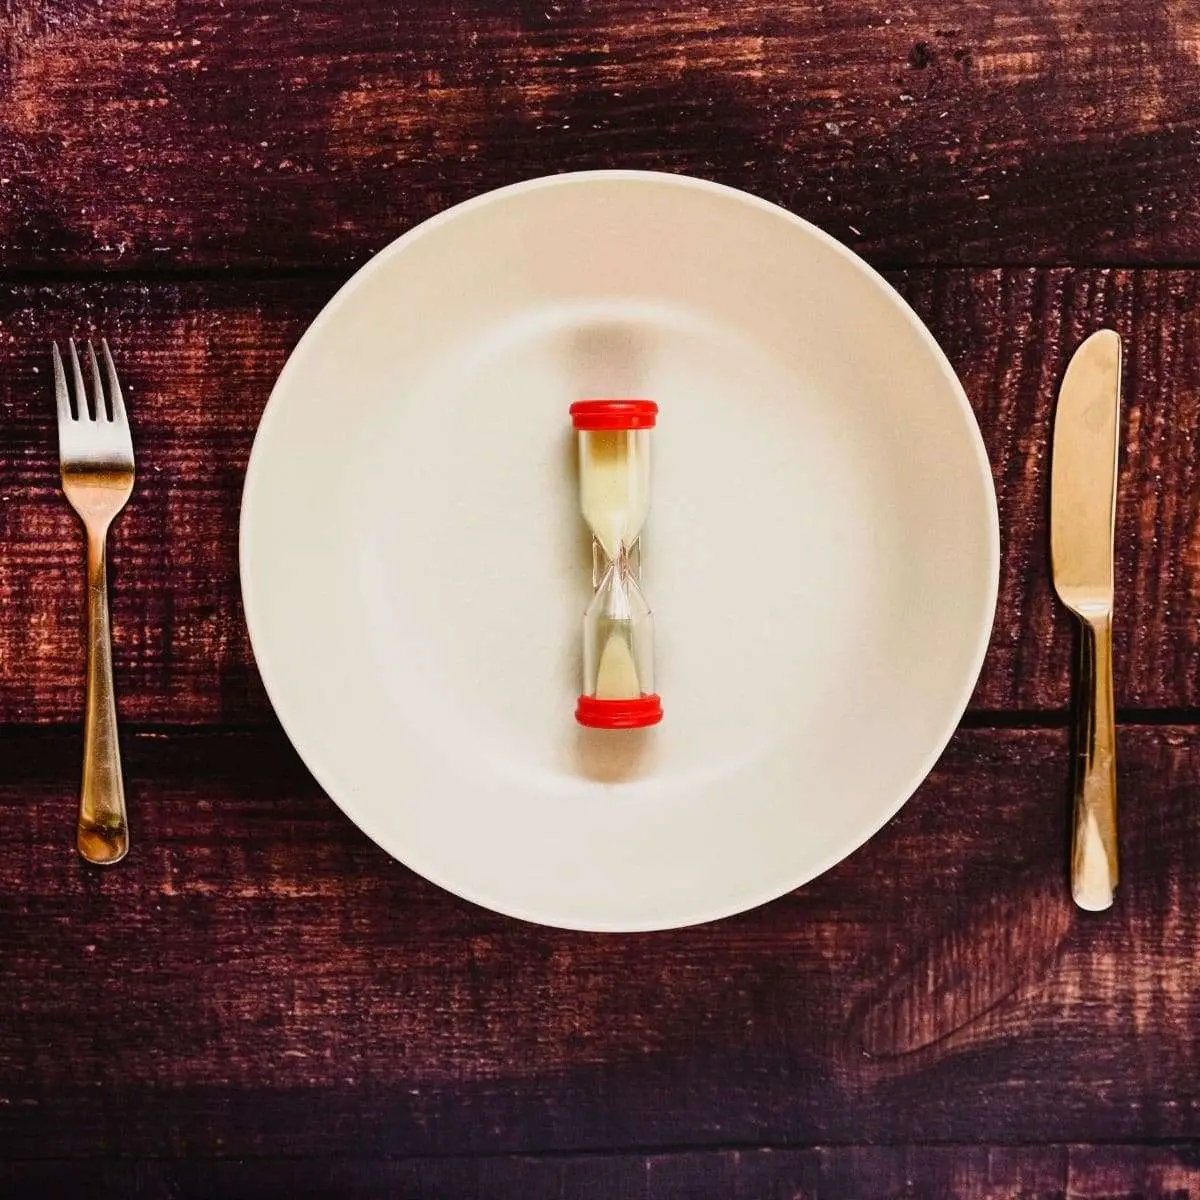 Intermittent Fasting and Keto: Can You Do Both?